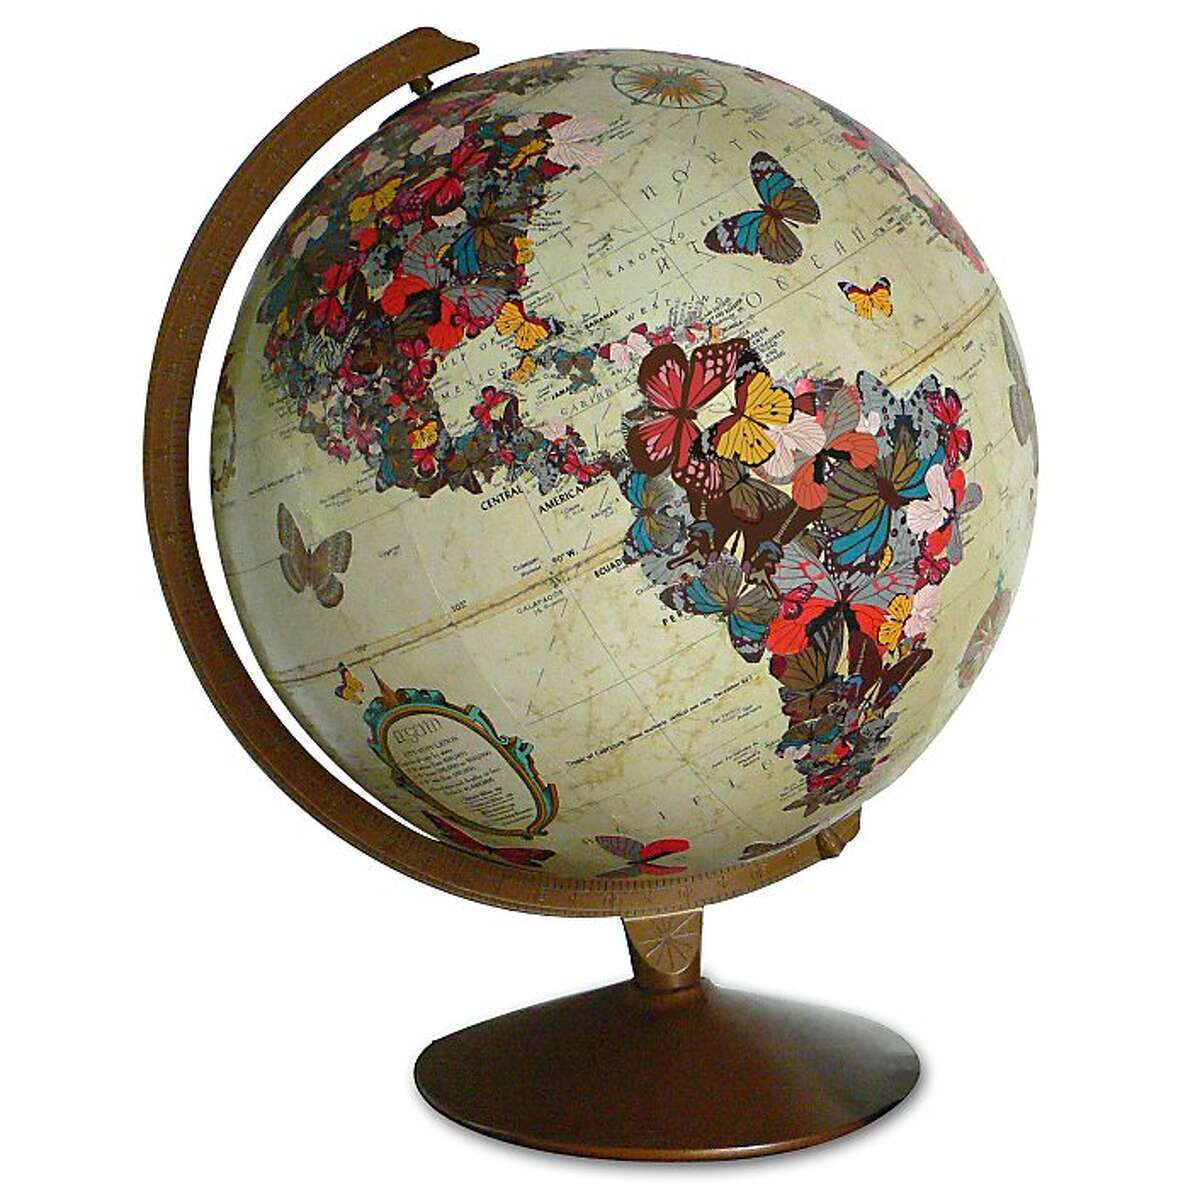 Wendy Gold creates both custom globes and a line of 19 basic designs with her line ImagineNations. She decoupages old globes with photos, hand-cut artwork and lettering to create unique and beautiful keepsakes. This is the Flutter By.